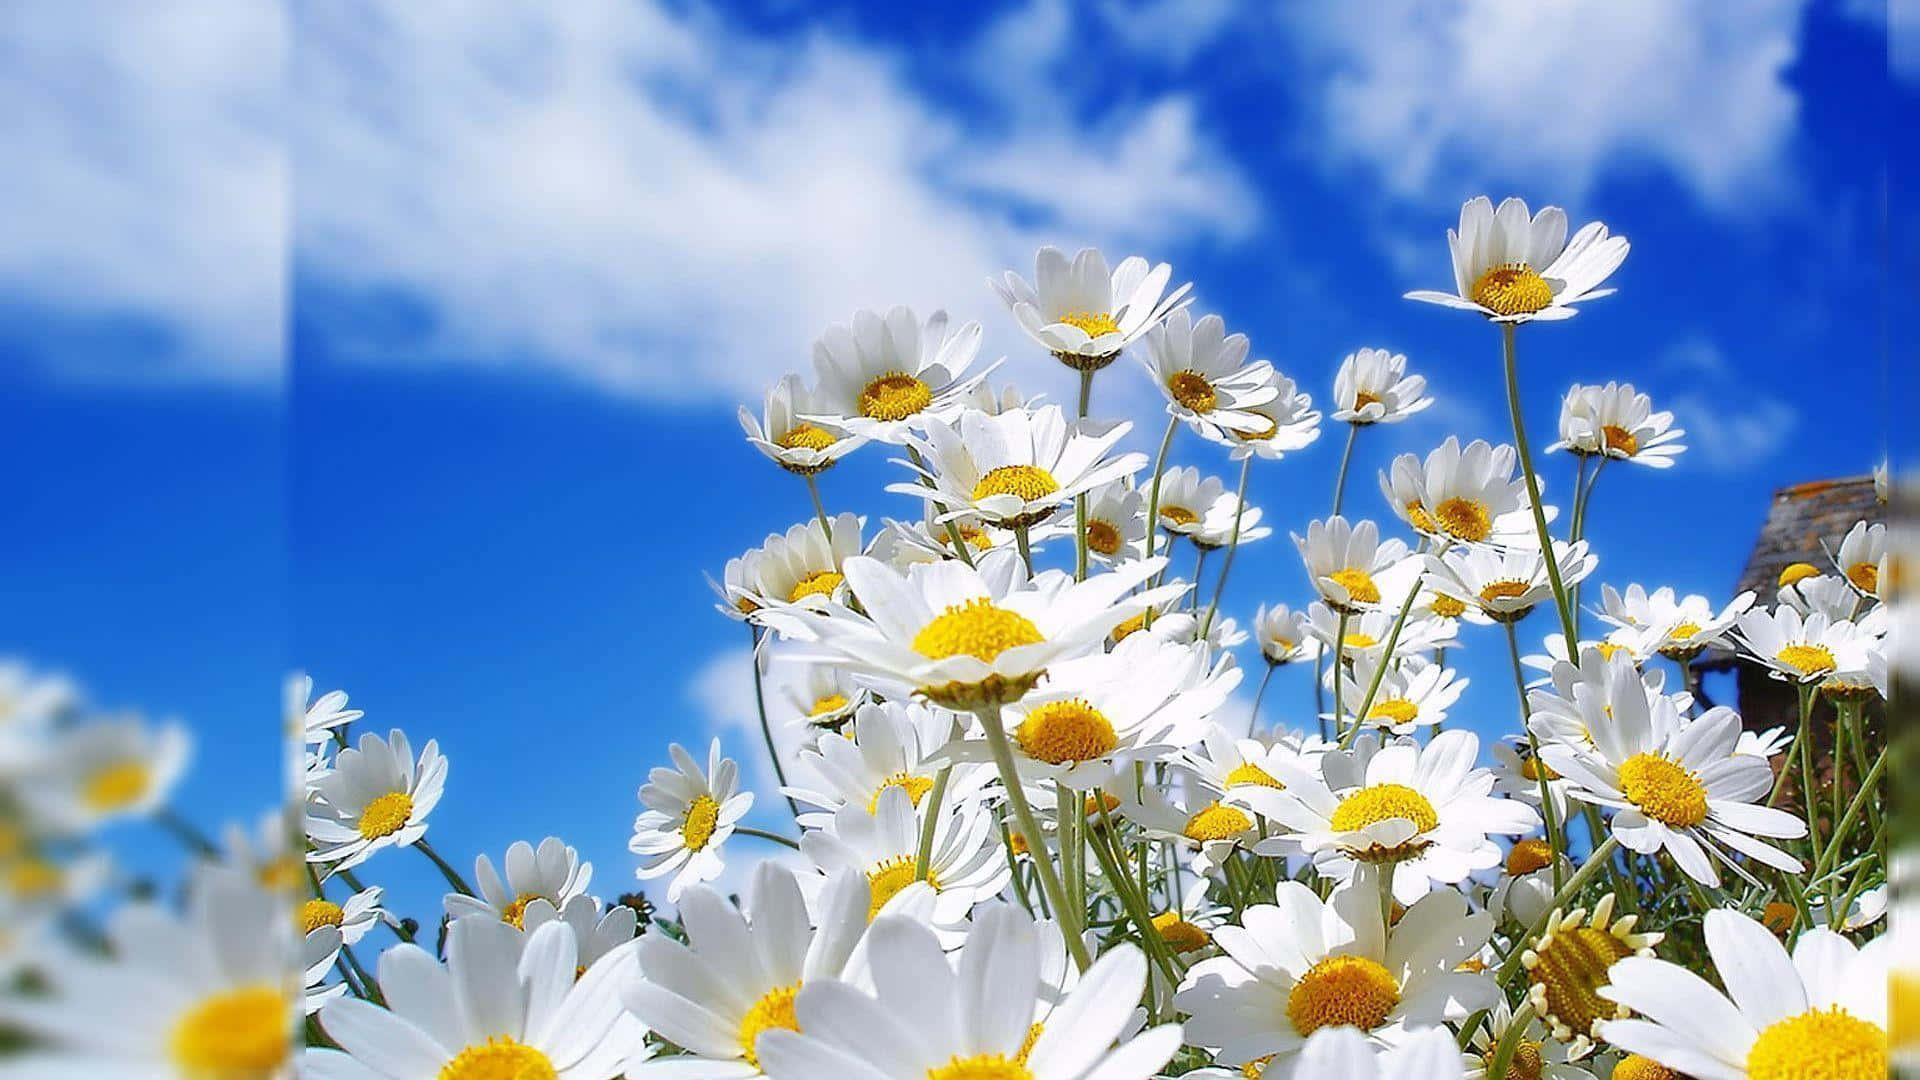 Colorful Flowers Blooming on a Sunny Day